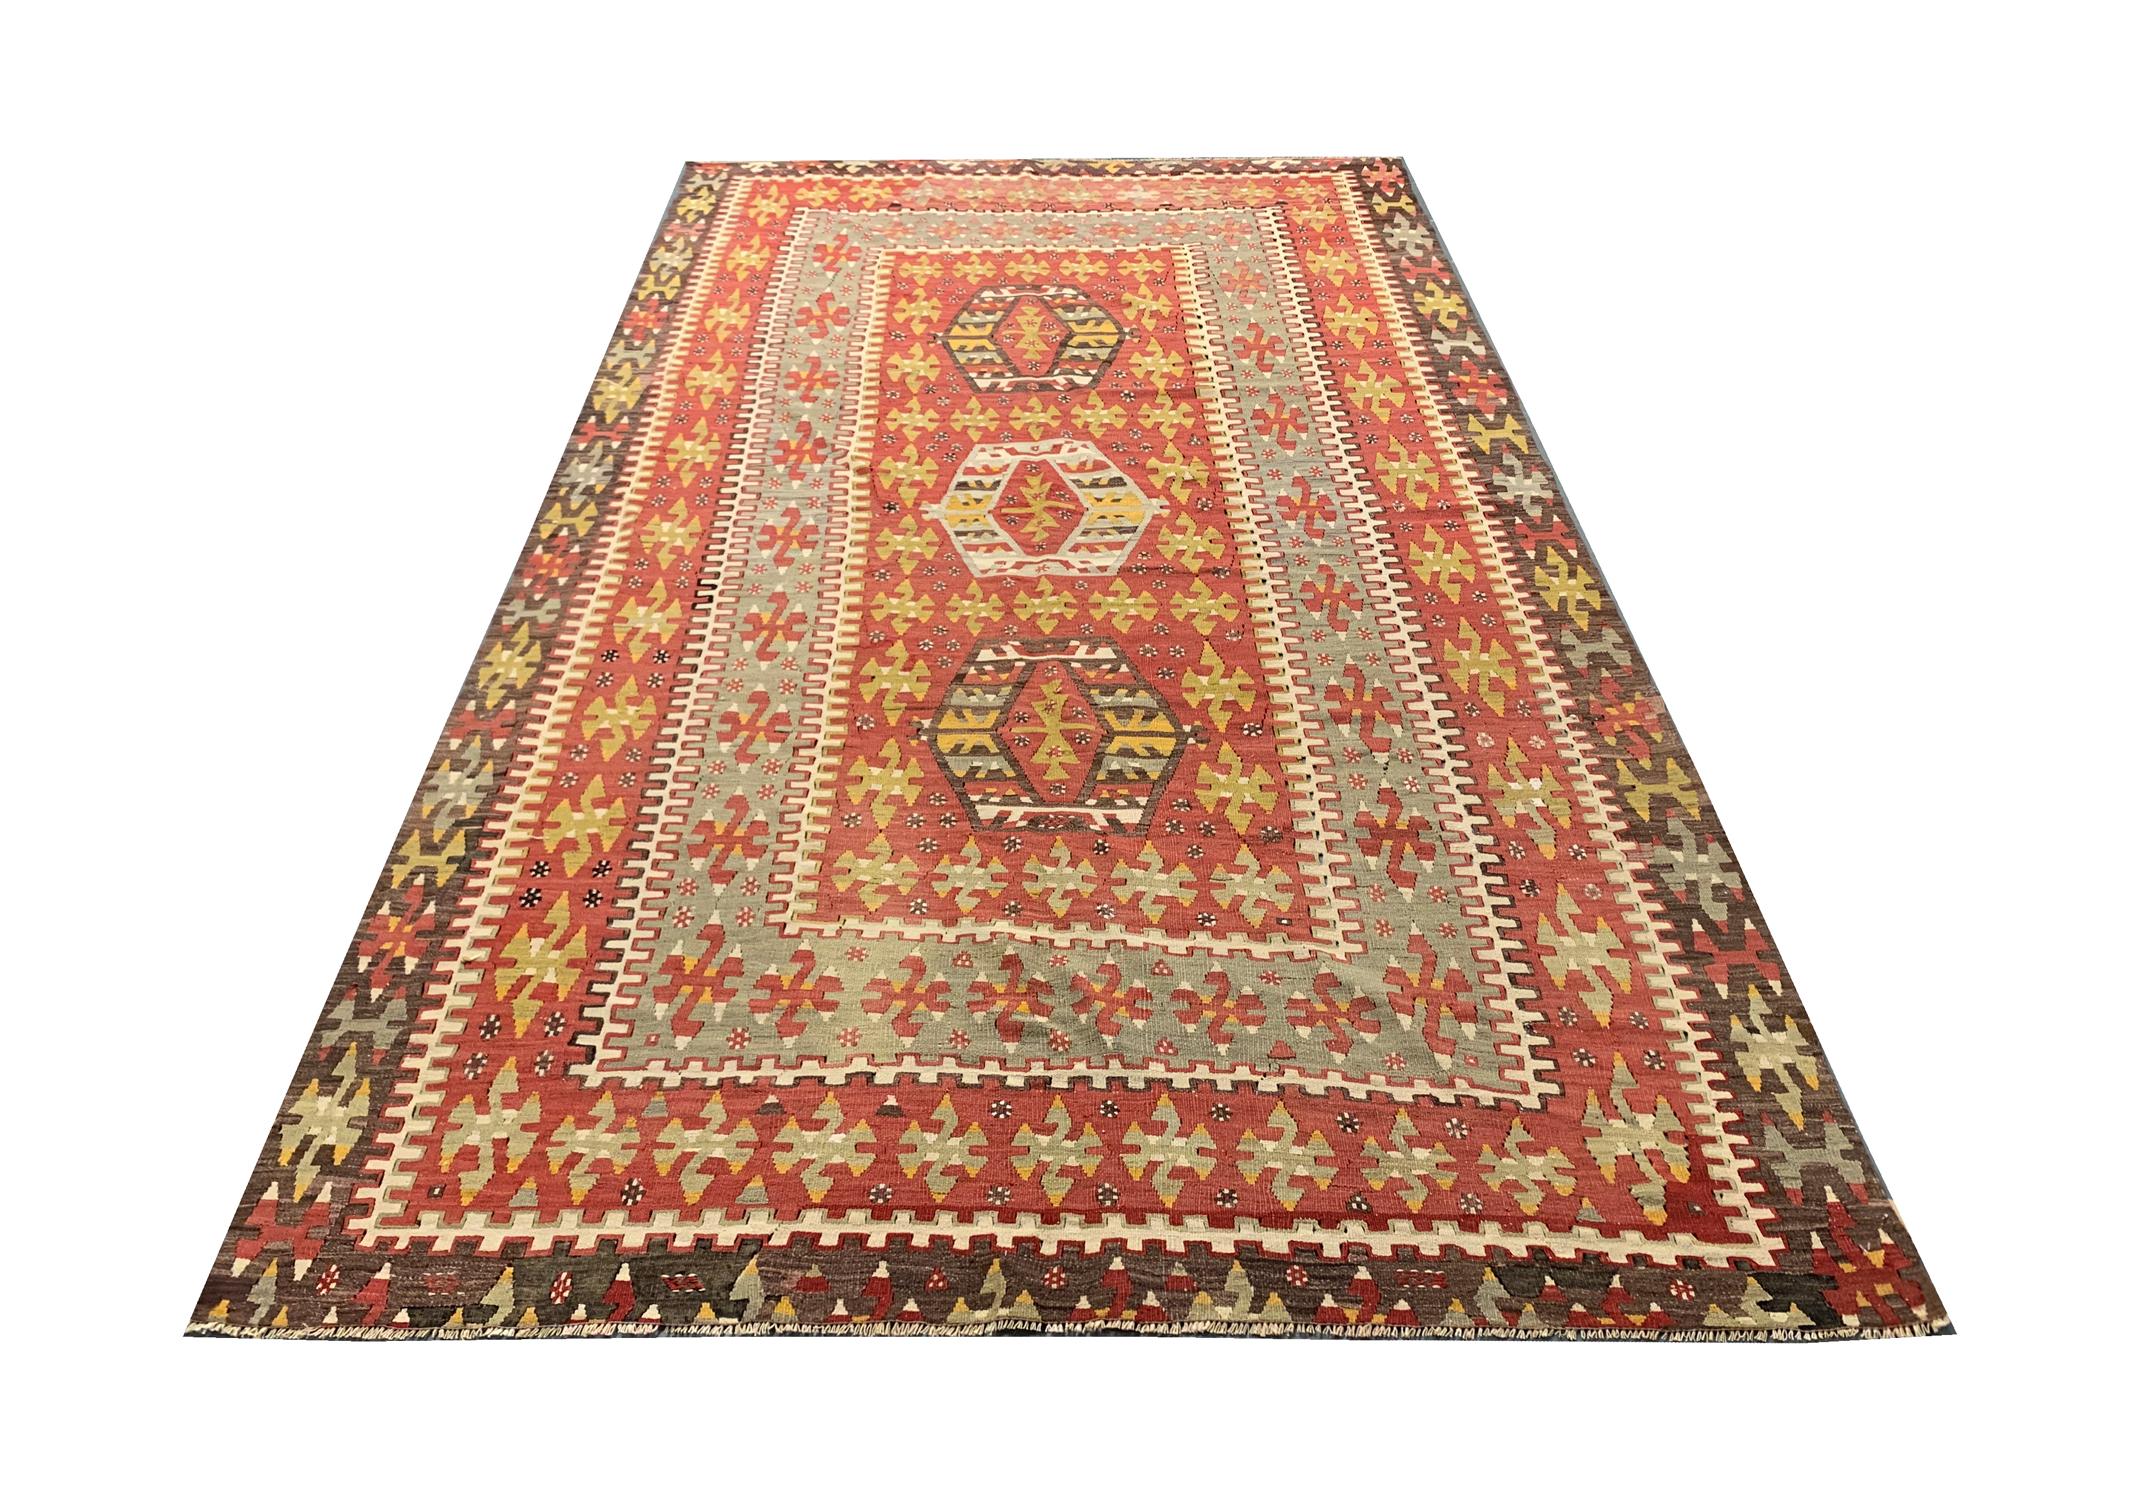 This fantastic Kilim was woven in the 20th Century and features a beautiful tribal design. Decorated with motifs and medallions woven intricately into this piece, it will make the perfect accent rug in any room. Guaranteed to uplift both modern and